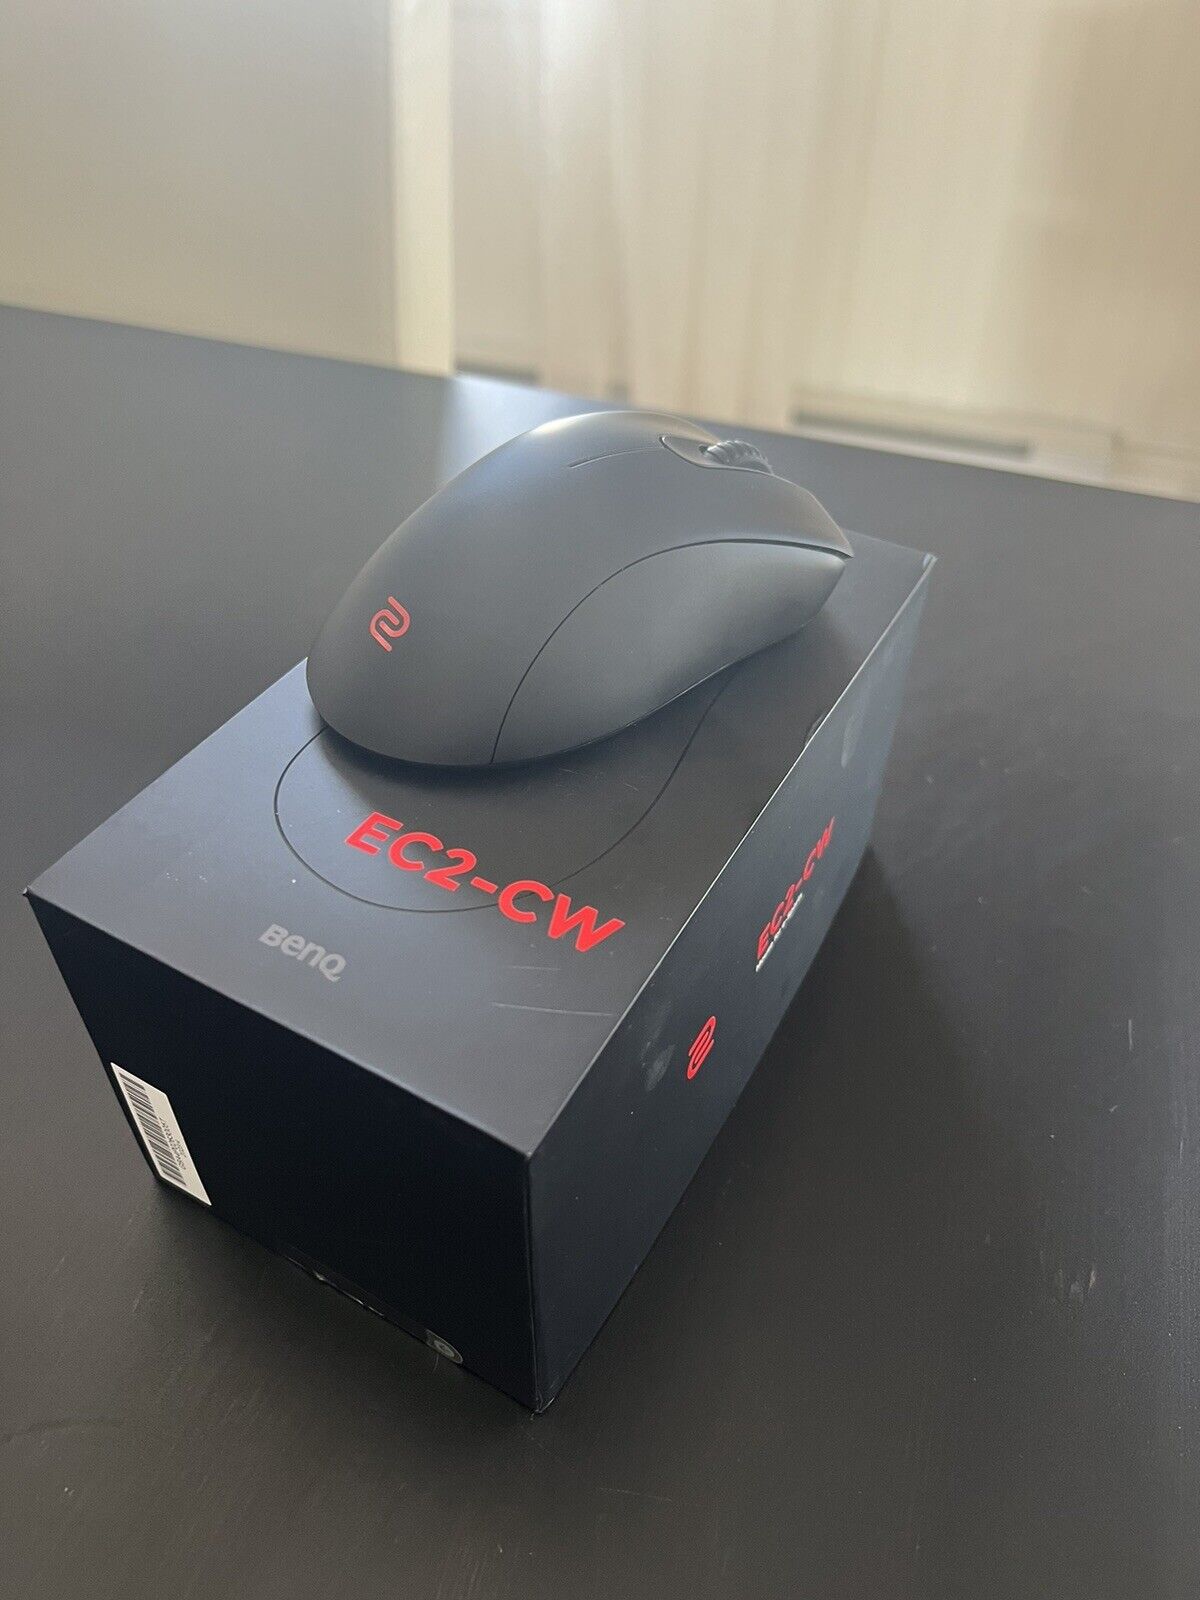 ZOWIE EC2-CW Wireless Mouse For Esports